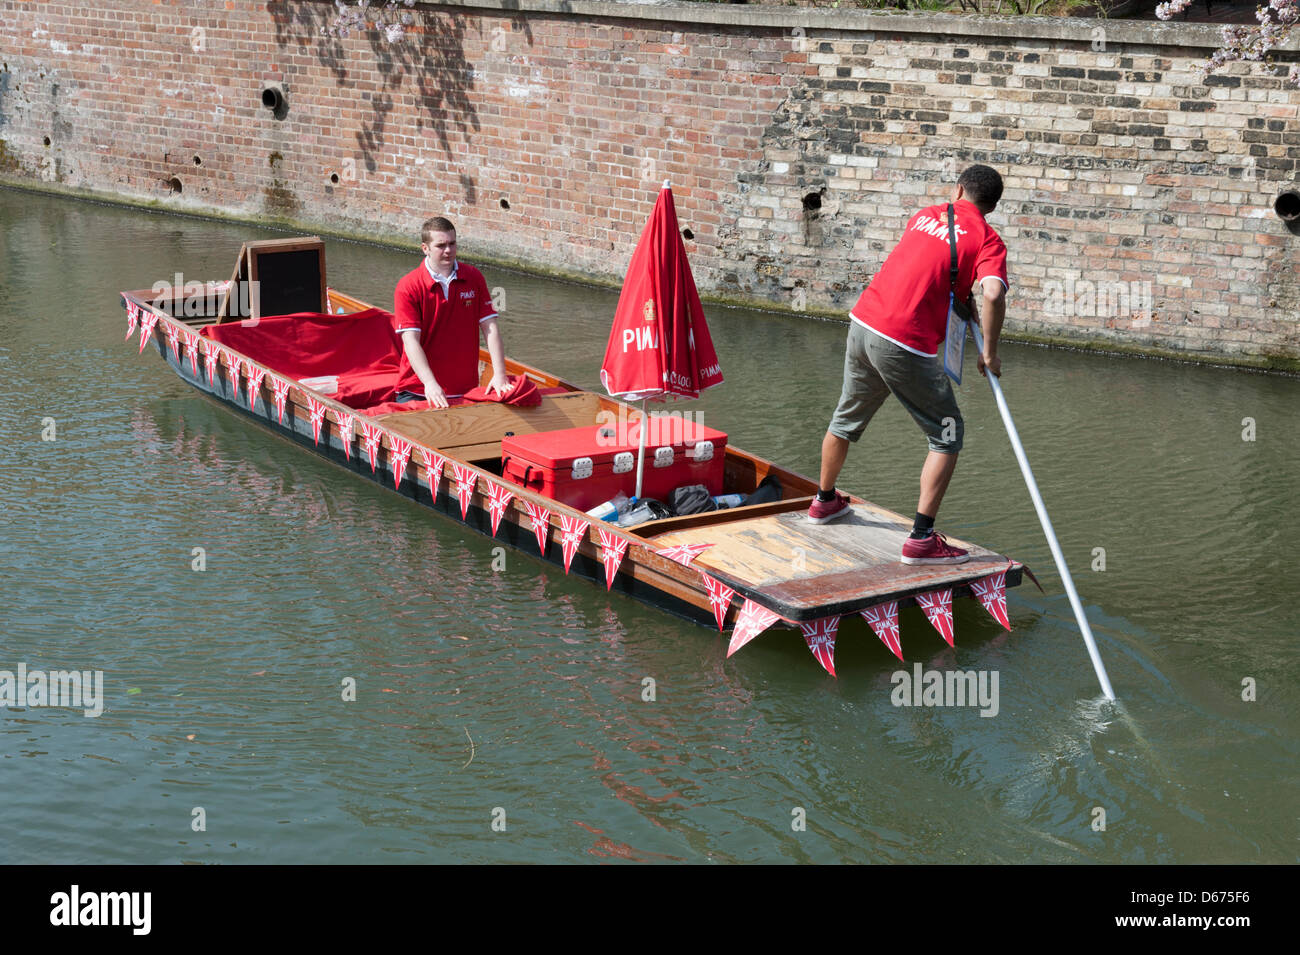 Cambridge, UK. 14 April 2013. A colourfully decorated punt sells drinks and snacks on the River Cam. The river was busy with tourists enjoying the warmest day of the year so far with temperatures hitting 20 degrees centigrade. Spring weather finally arrived after weeks of cold wet weather. Julian Eales/Alamy Live News Stock Photo